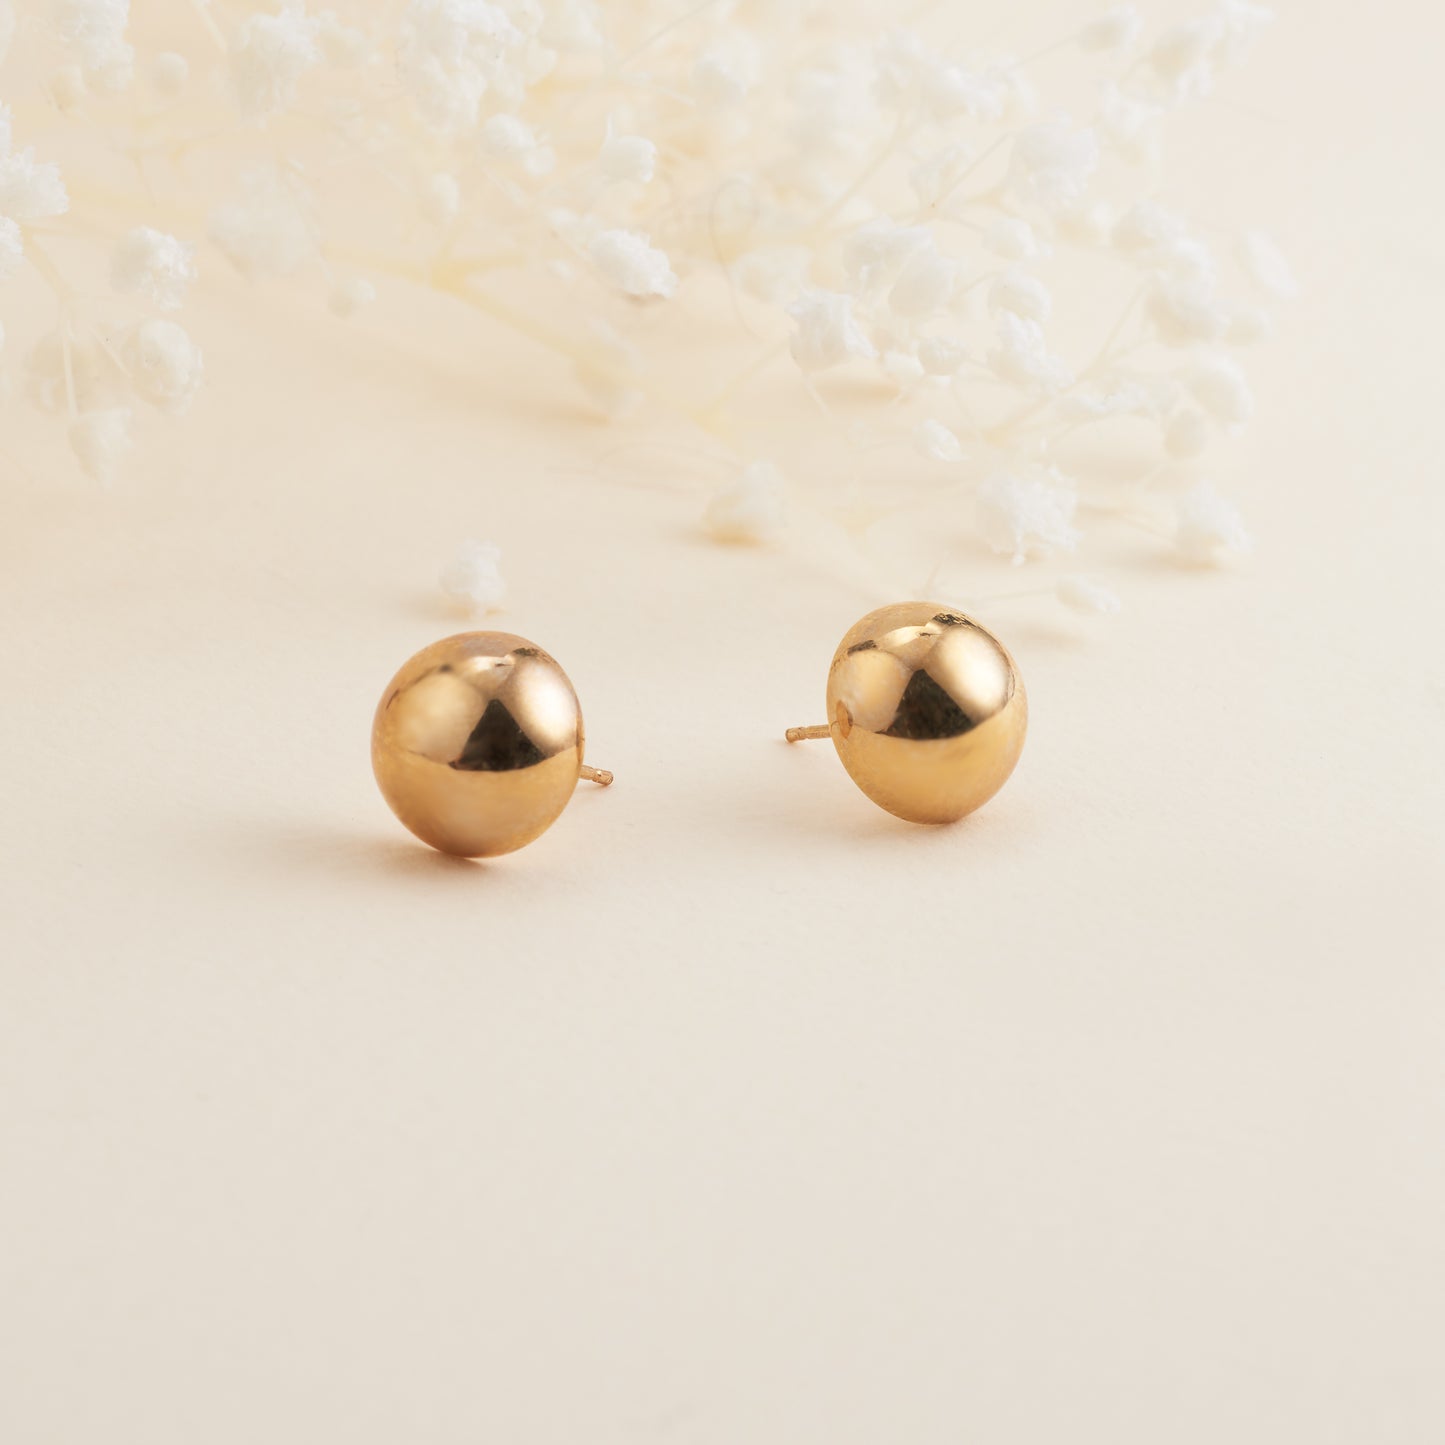 9K Yellow Gold Dome Stud Earrings 12mm